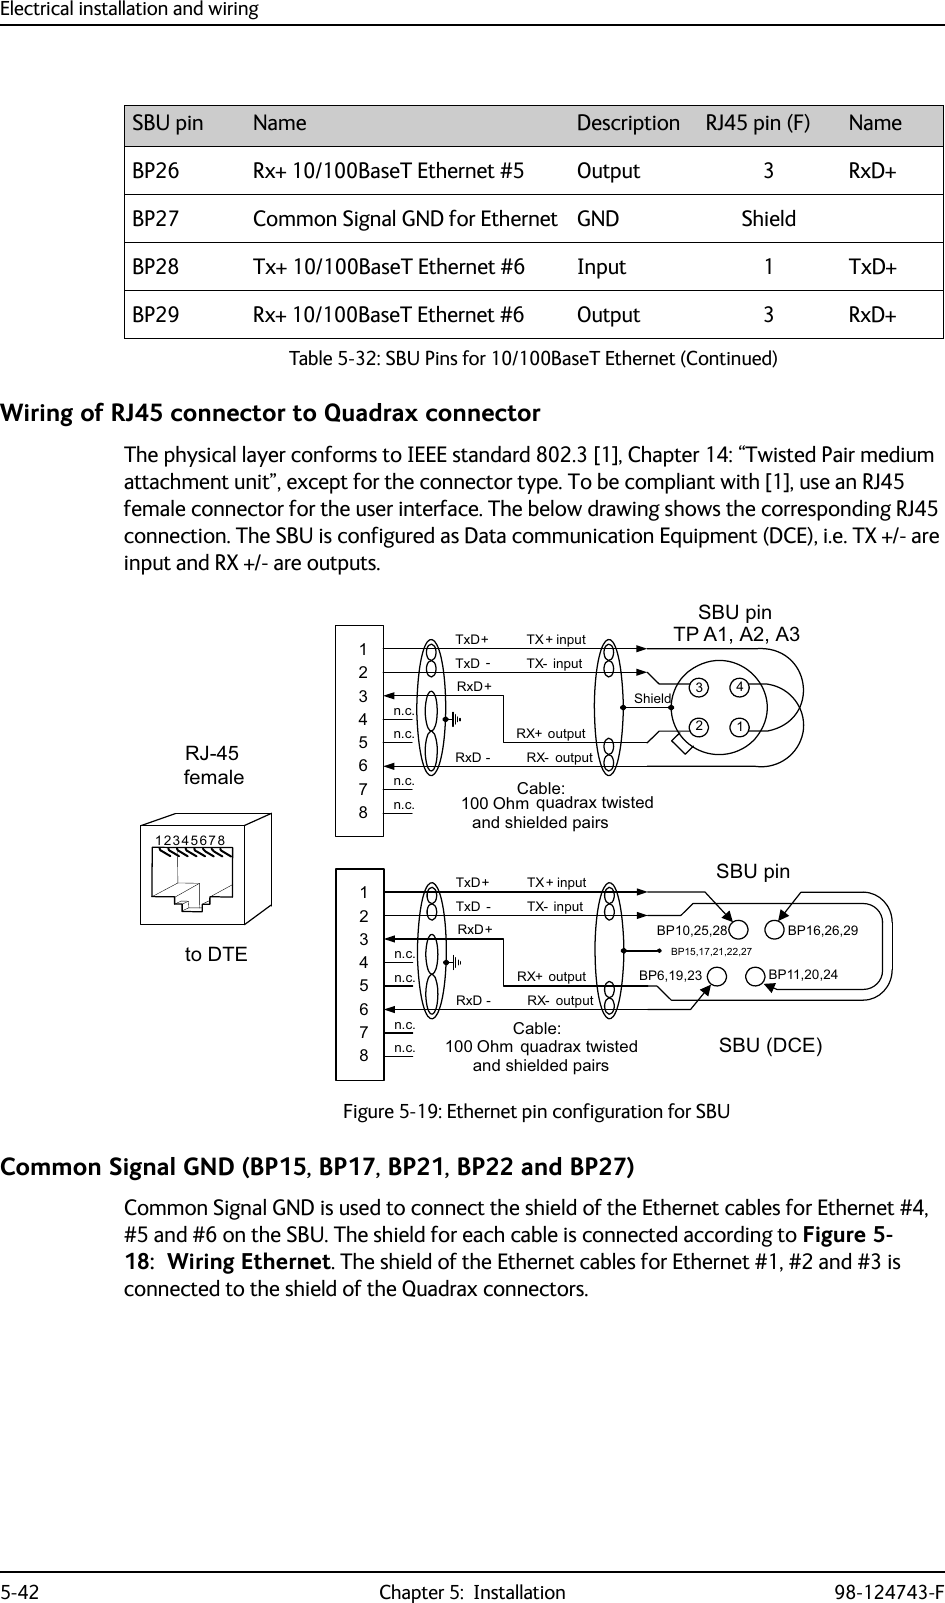 Electrical installation and wiring5-42 Chapter 5:  Installation 98-124743-FWiring of RJ45 connector to Quadrax connectorThe physical layer conforms to IEEE standard 802.3 [1], Chapter 14: “Twisted Pair medium attachment unit”, except for the connector type. To be compliant with [1], use an RJ45 female connector for the user interface. The below drawing shows the corresponding RJ45 connection. The SBU is configured as Data communication Equipment (DCE), i.e. TX +/- are input and RX +/- are outputs.Figure 5-19: Ethernet pin configuration for SBUCommon Signal GND (BP15, BP17, BP21, BP22 and BP27)Common Signal GND is used to connect the shield of the Ethernet cables for Ethernet #4, #5 and #6 on the SBU. The shield for each cable is connected according to Figure 5-18:  Wiring Ethernet. The shield of the Ethernet cables for Ethernet #1, #2 and #3 is connected to the shield of the Quadrax connectors.BP26 Rx+ 10/100BaseT Ethernet #5 Output 3 RxD+BP27 Common Signal GND for Ethernet GND ShieldBP28 Tx+ 10/100BaseT Ethernet #6 Input 1 TxD+BP29 Rx+ 10/100BaseT Ethernet #6 Output 3 RxD+SBU pin Name Description RJ45 pin (F) NameTable 5-32: SBU Pins for 10/100BaseT Ethernet (Continued)6%8SLQ73$$$6KLHOG7[&apos; 7;LQSXWQF7[&apos; 7; LQSXW5[&apos;5;RXWSXWQF5[&apos; 5; RXWSXWQFQF  2KP TXDGUD[WZLVWHGDQGVKLHOGHGSDLUV7[&apos; 7;LQSXWQF7[&apos; 7; LQSXW5[&apos;5;RXWSXWQF5[&apos; 5; RXWSXWQFQFDQGVKLHOGHGSDLUV6%8SLQ6%8&apos;&amp;(%3 %3%35-IHPDOHWR&apos;7(%3%3&amp;DEOH&amp;DEOH 2KP TXDGUD[WZLVWHG